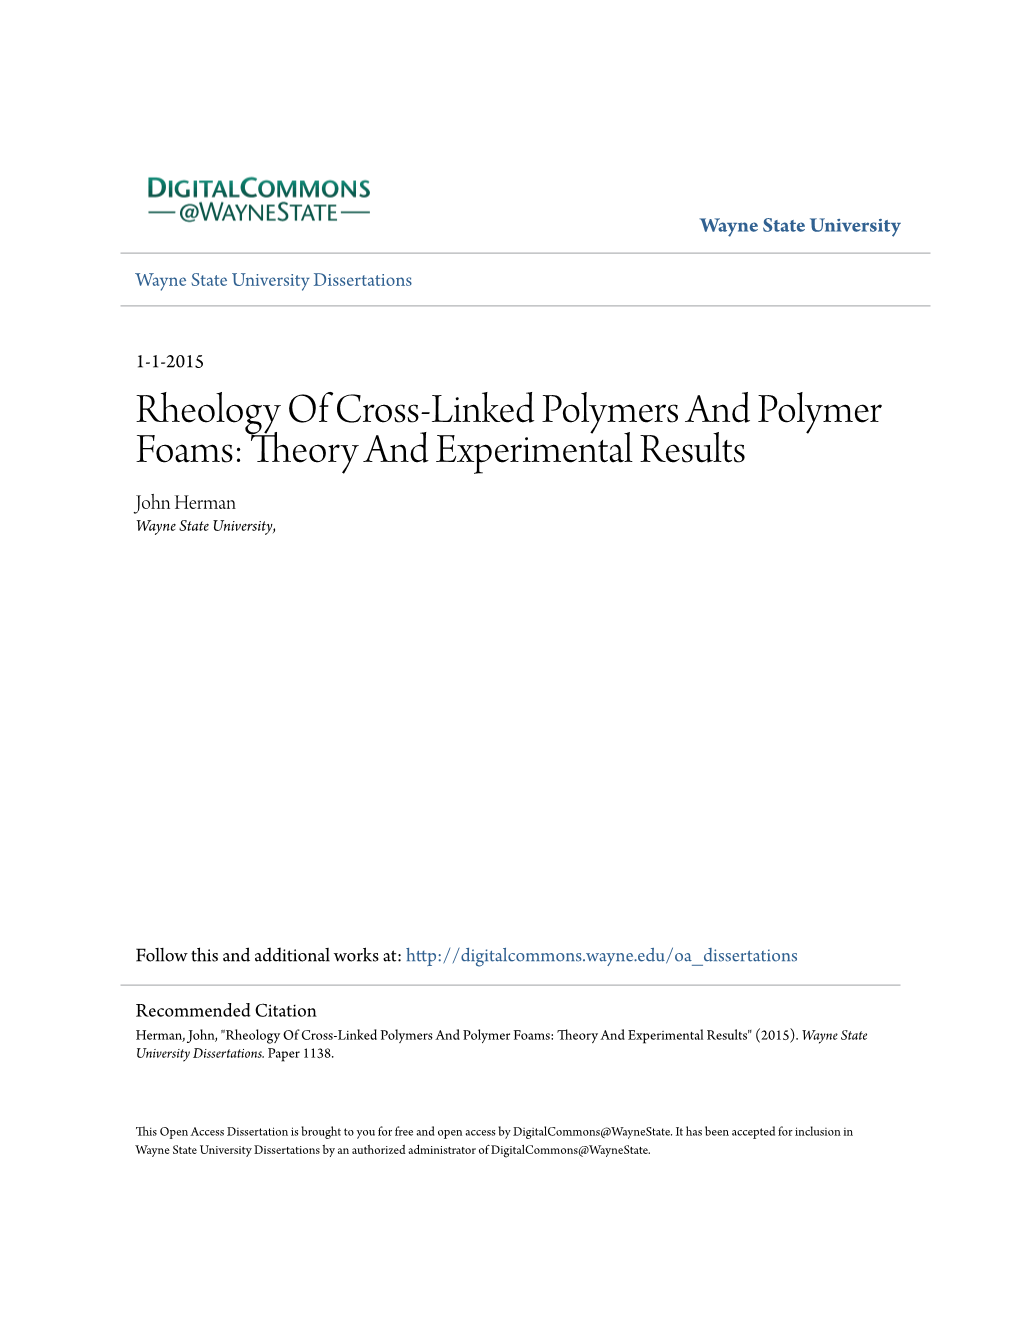 Rheology of Cross-Linked Polymers and Polymer Foams: Theory and Experimental Results John Herman Wayne State University